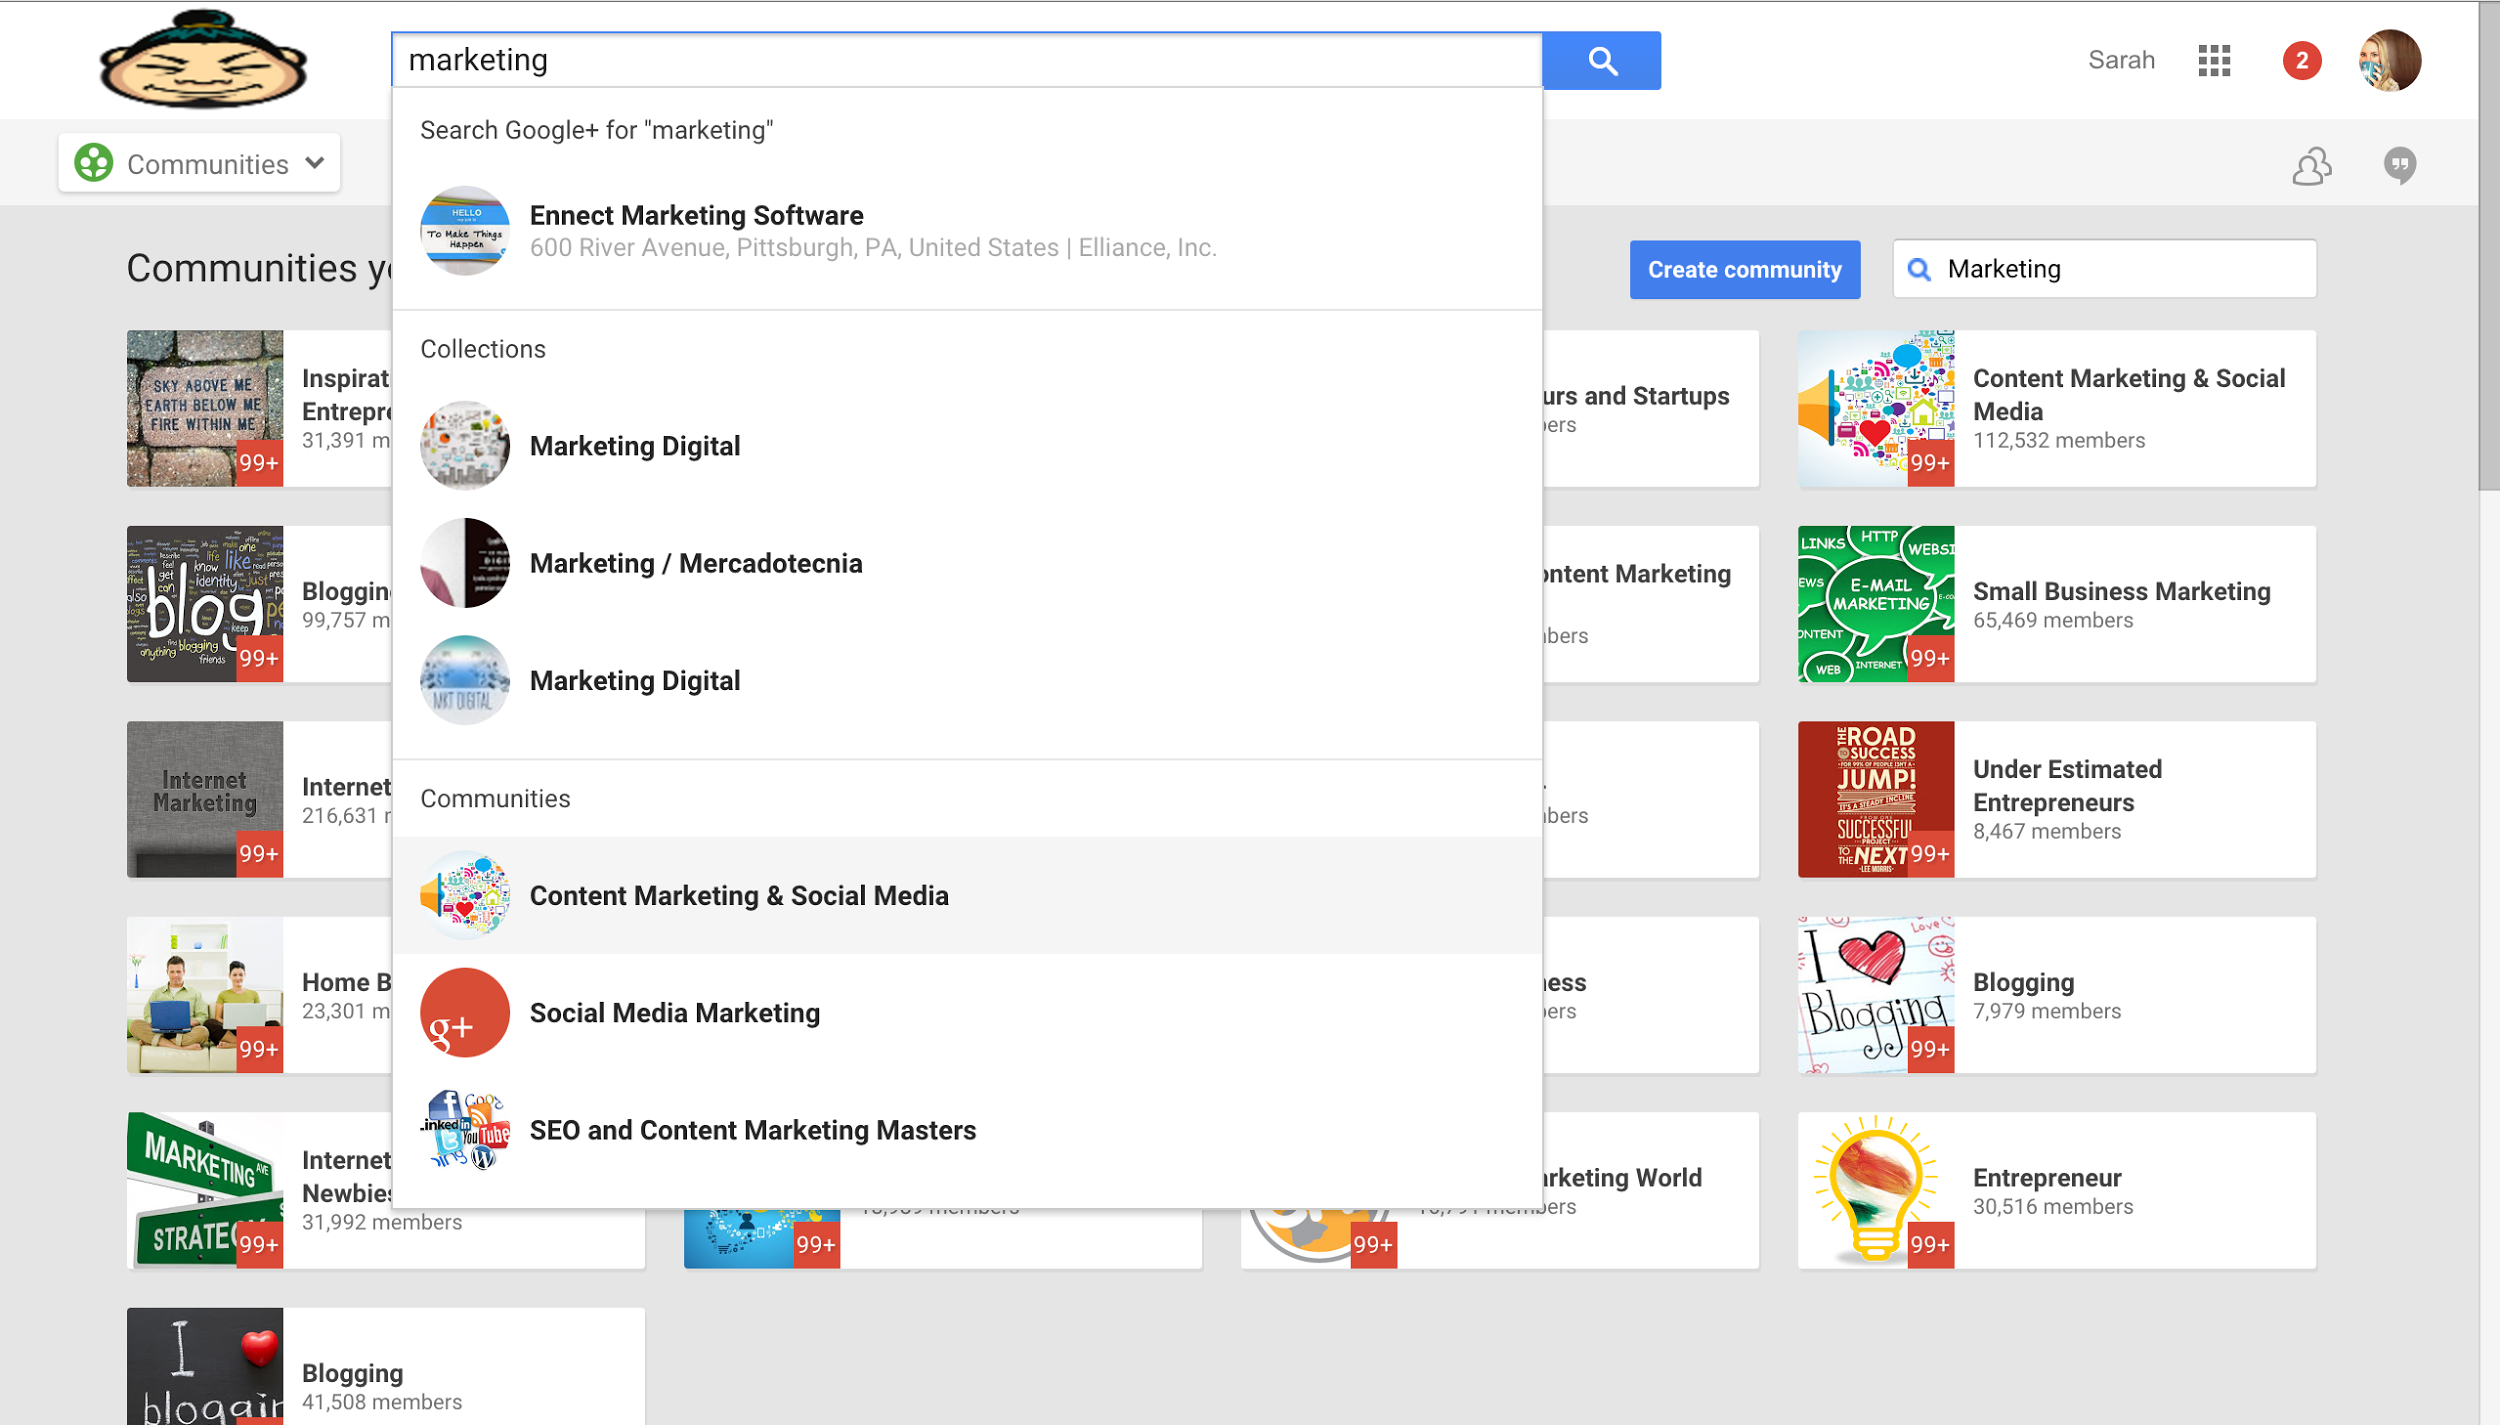 Screenshot of a search for "marketing" on Google+